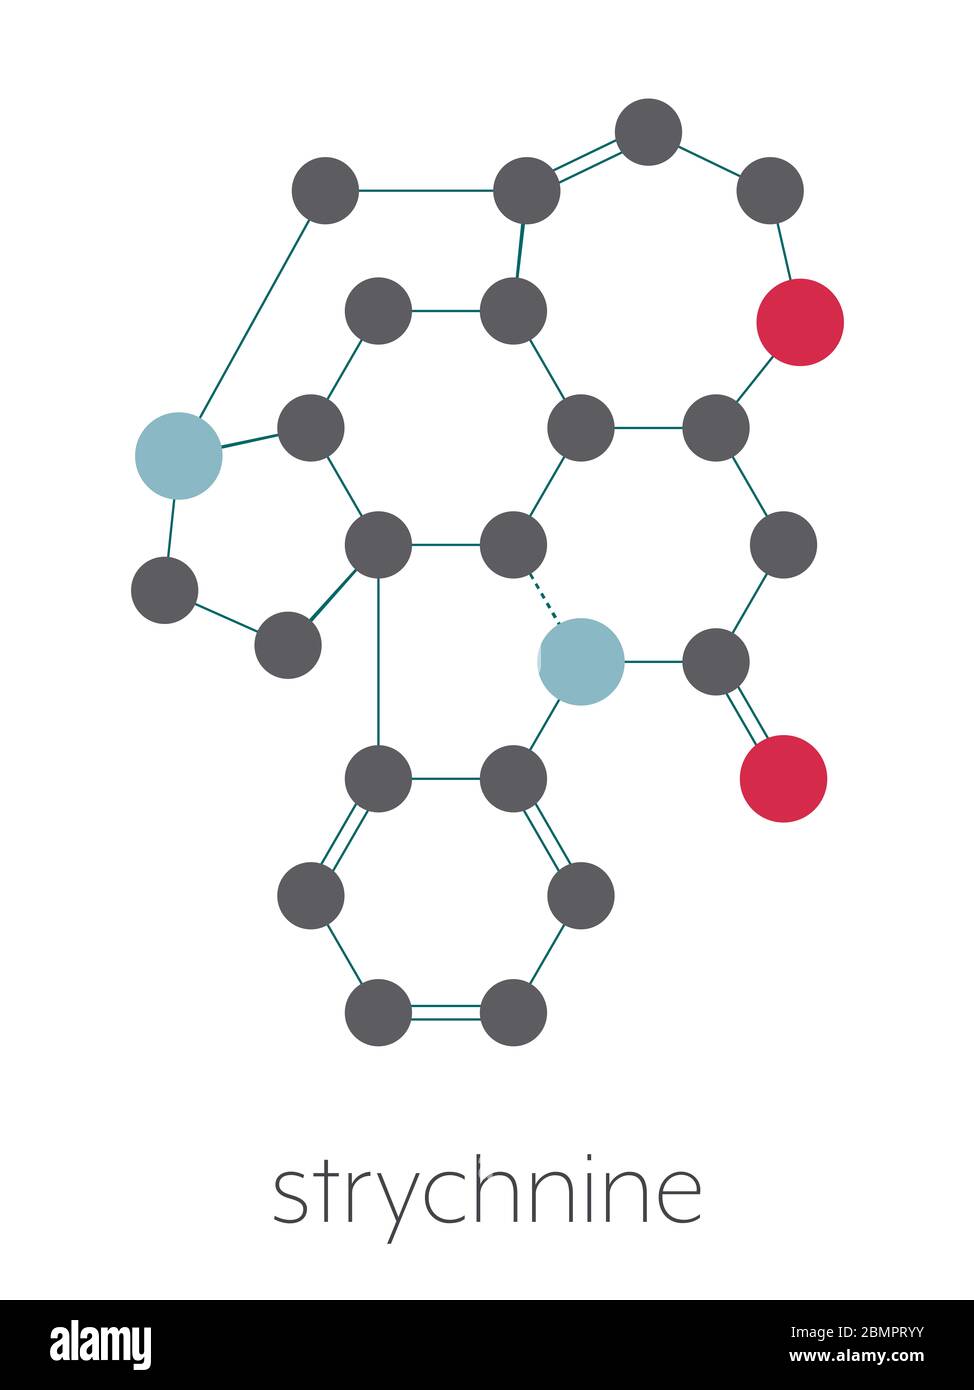 Strychnine poisonous alkaloid molecule. Isolated from Strychnos nux-vomica tree. Stylized skeletal formula (chemical structure): Atoms are shown as color-coded circles: hydrogen (hidden), carbon (grey), oxygen (red), nitrogen (blue). Stock Photo